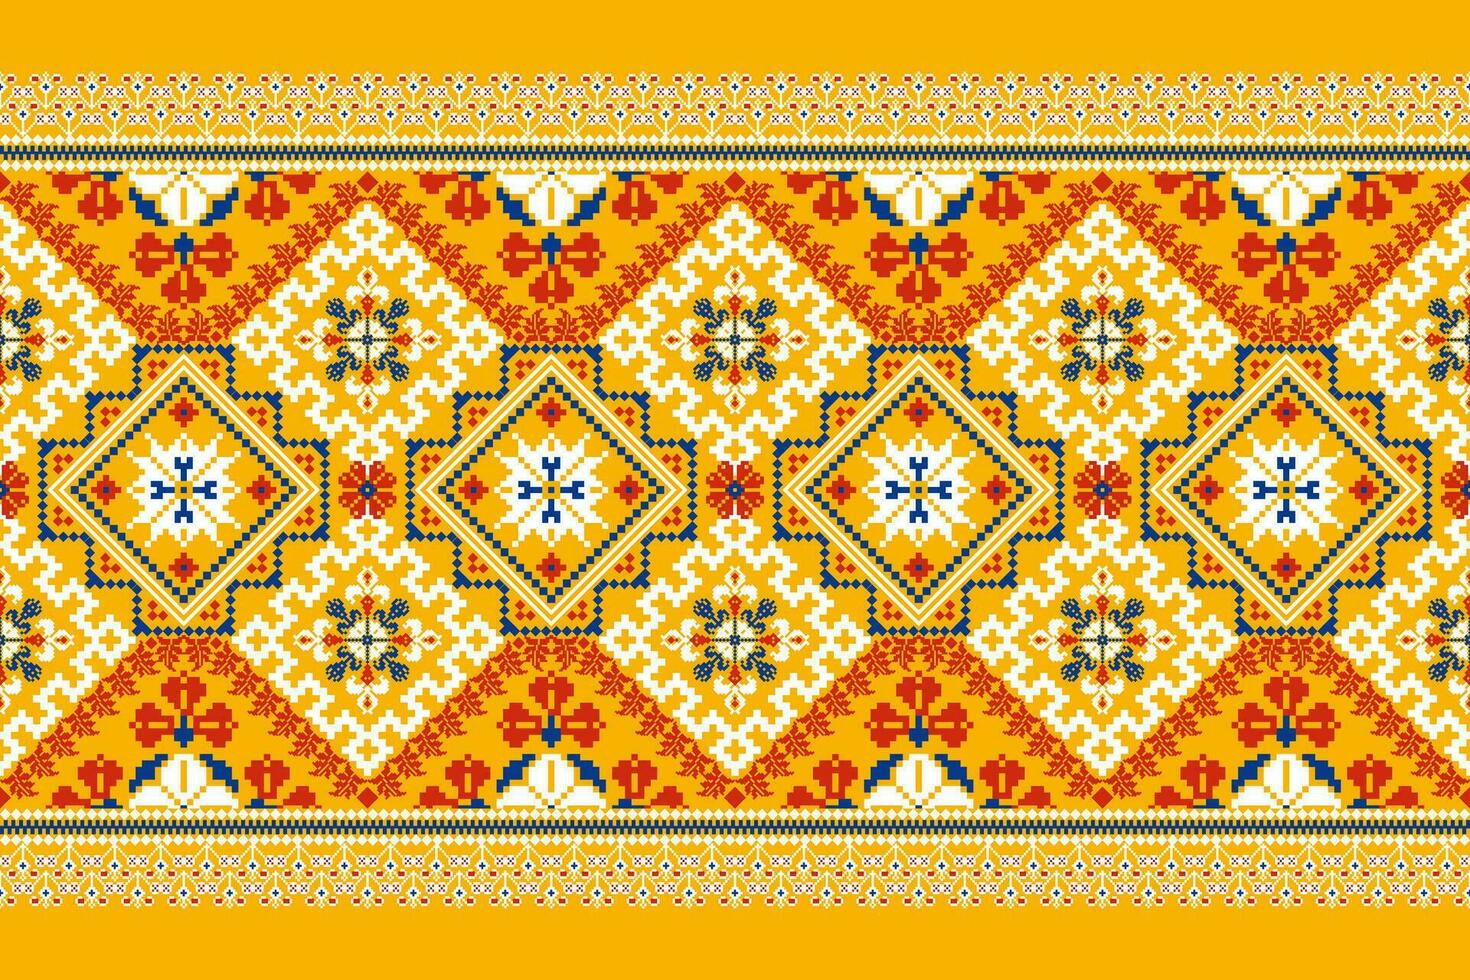 Floral Cross Stitch Embroidery on orange background.geometric ethnic oriental pattern traditional.Aztec style abstract vector illustration.design for texture,fabric,clothing,wrapping,decoration,carpet